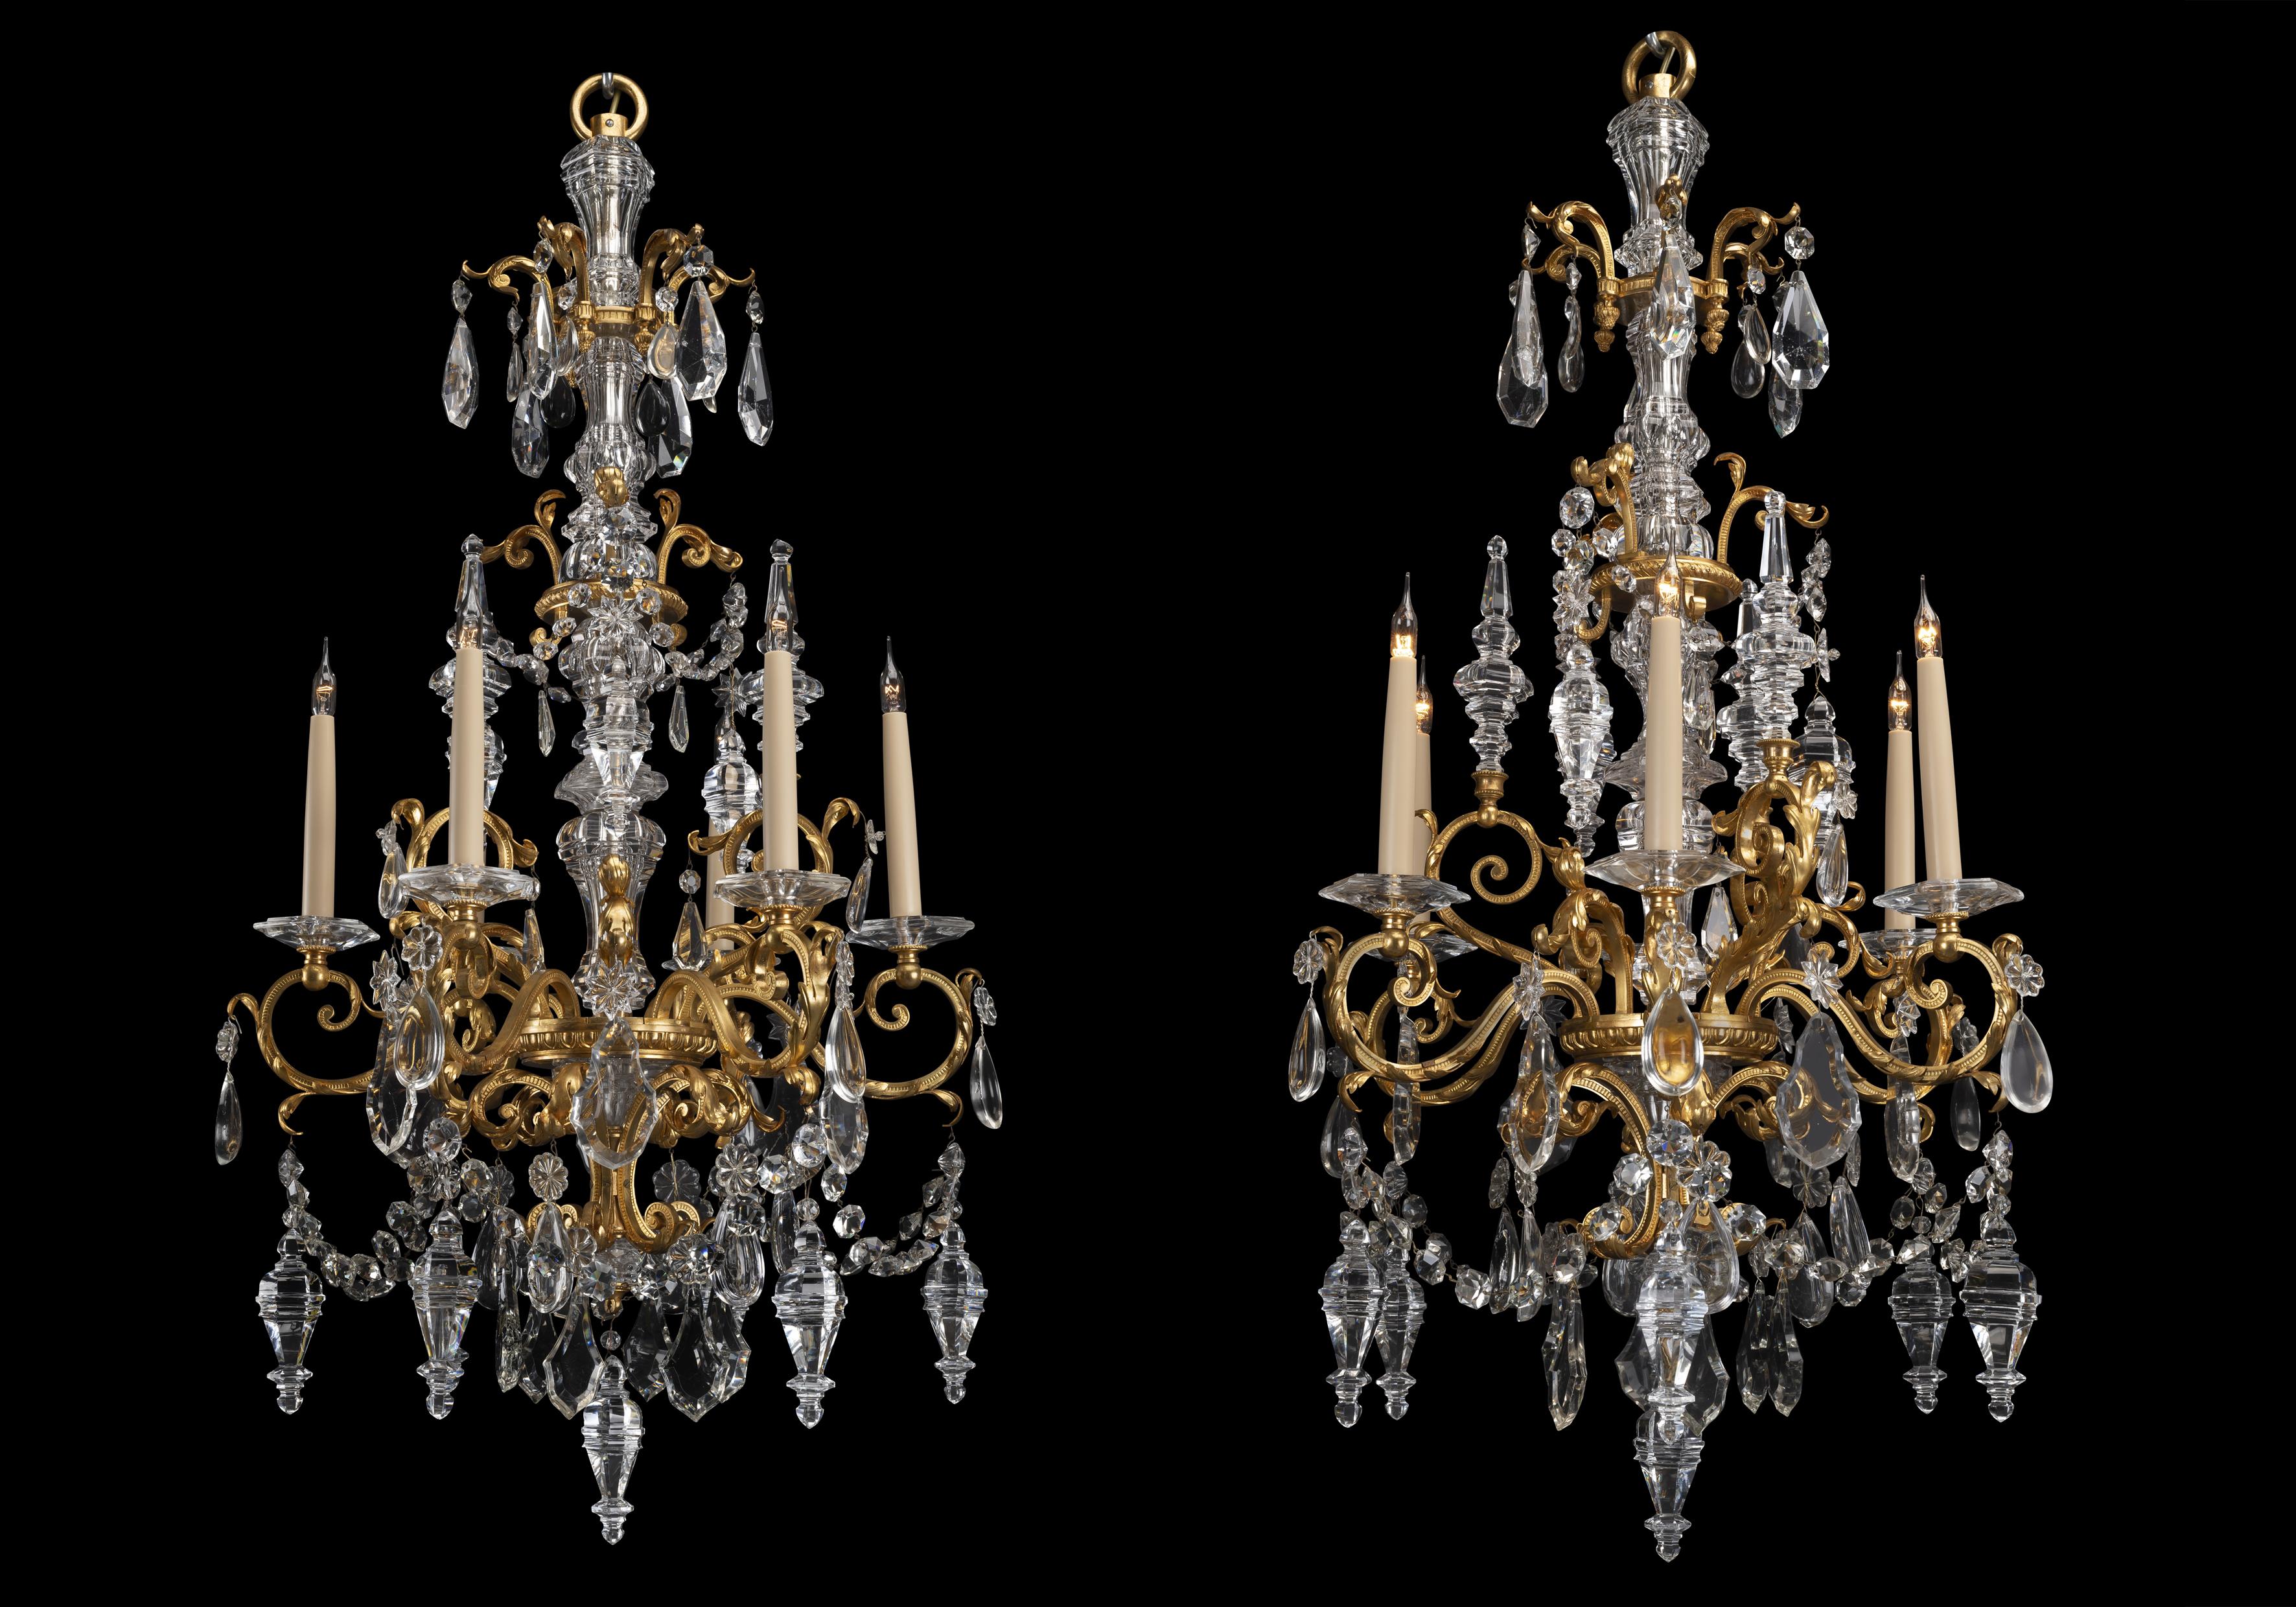 A fine pair of cut-glass and gilt-bronze six-light chandeliers. 

French, circa 1890. 

Each chandelier has a central moulded glass baluster column issuing six leaf ornamented scrolling gilt-bronze branches. The chandeliers are adorned with